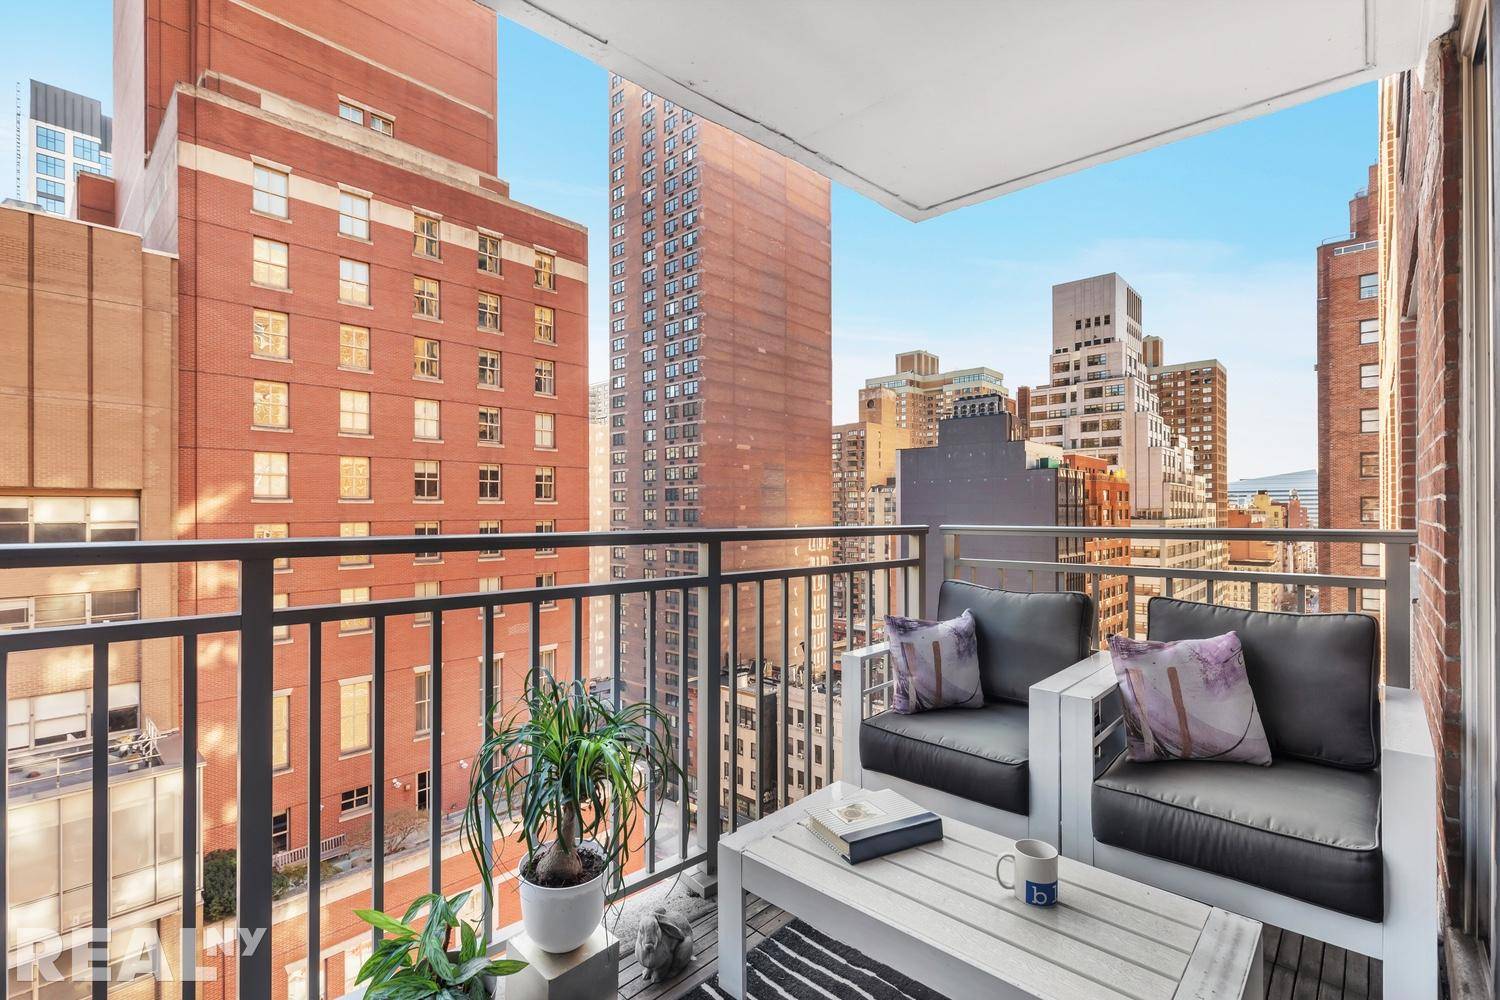 Residence 12G is a rare one bedroom located on the cross streets of acclaimed Lexington Avenue and East 35th Street.